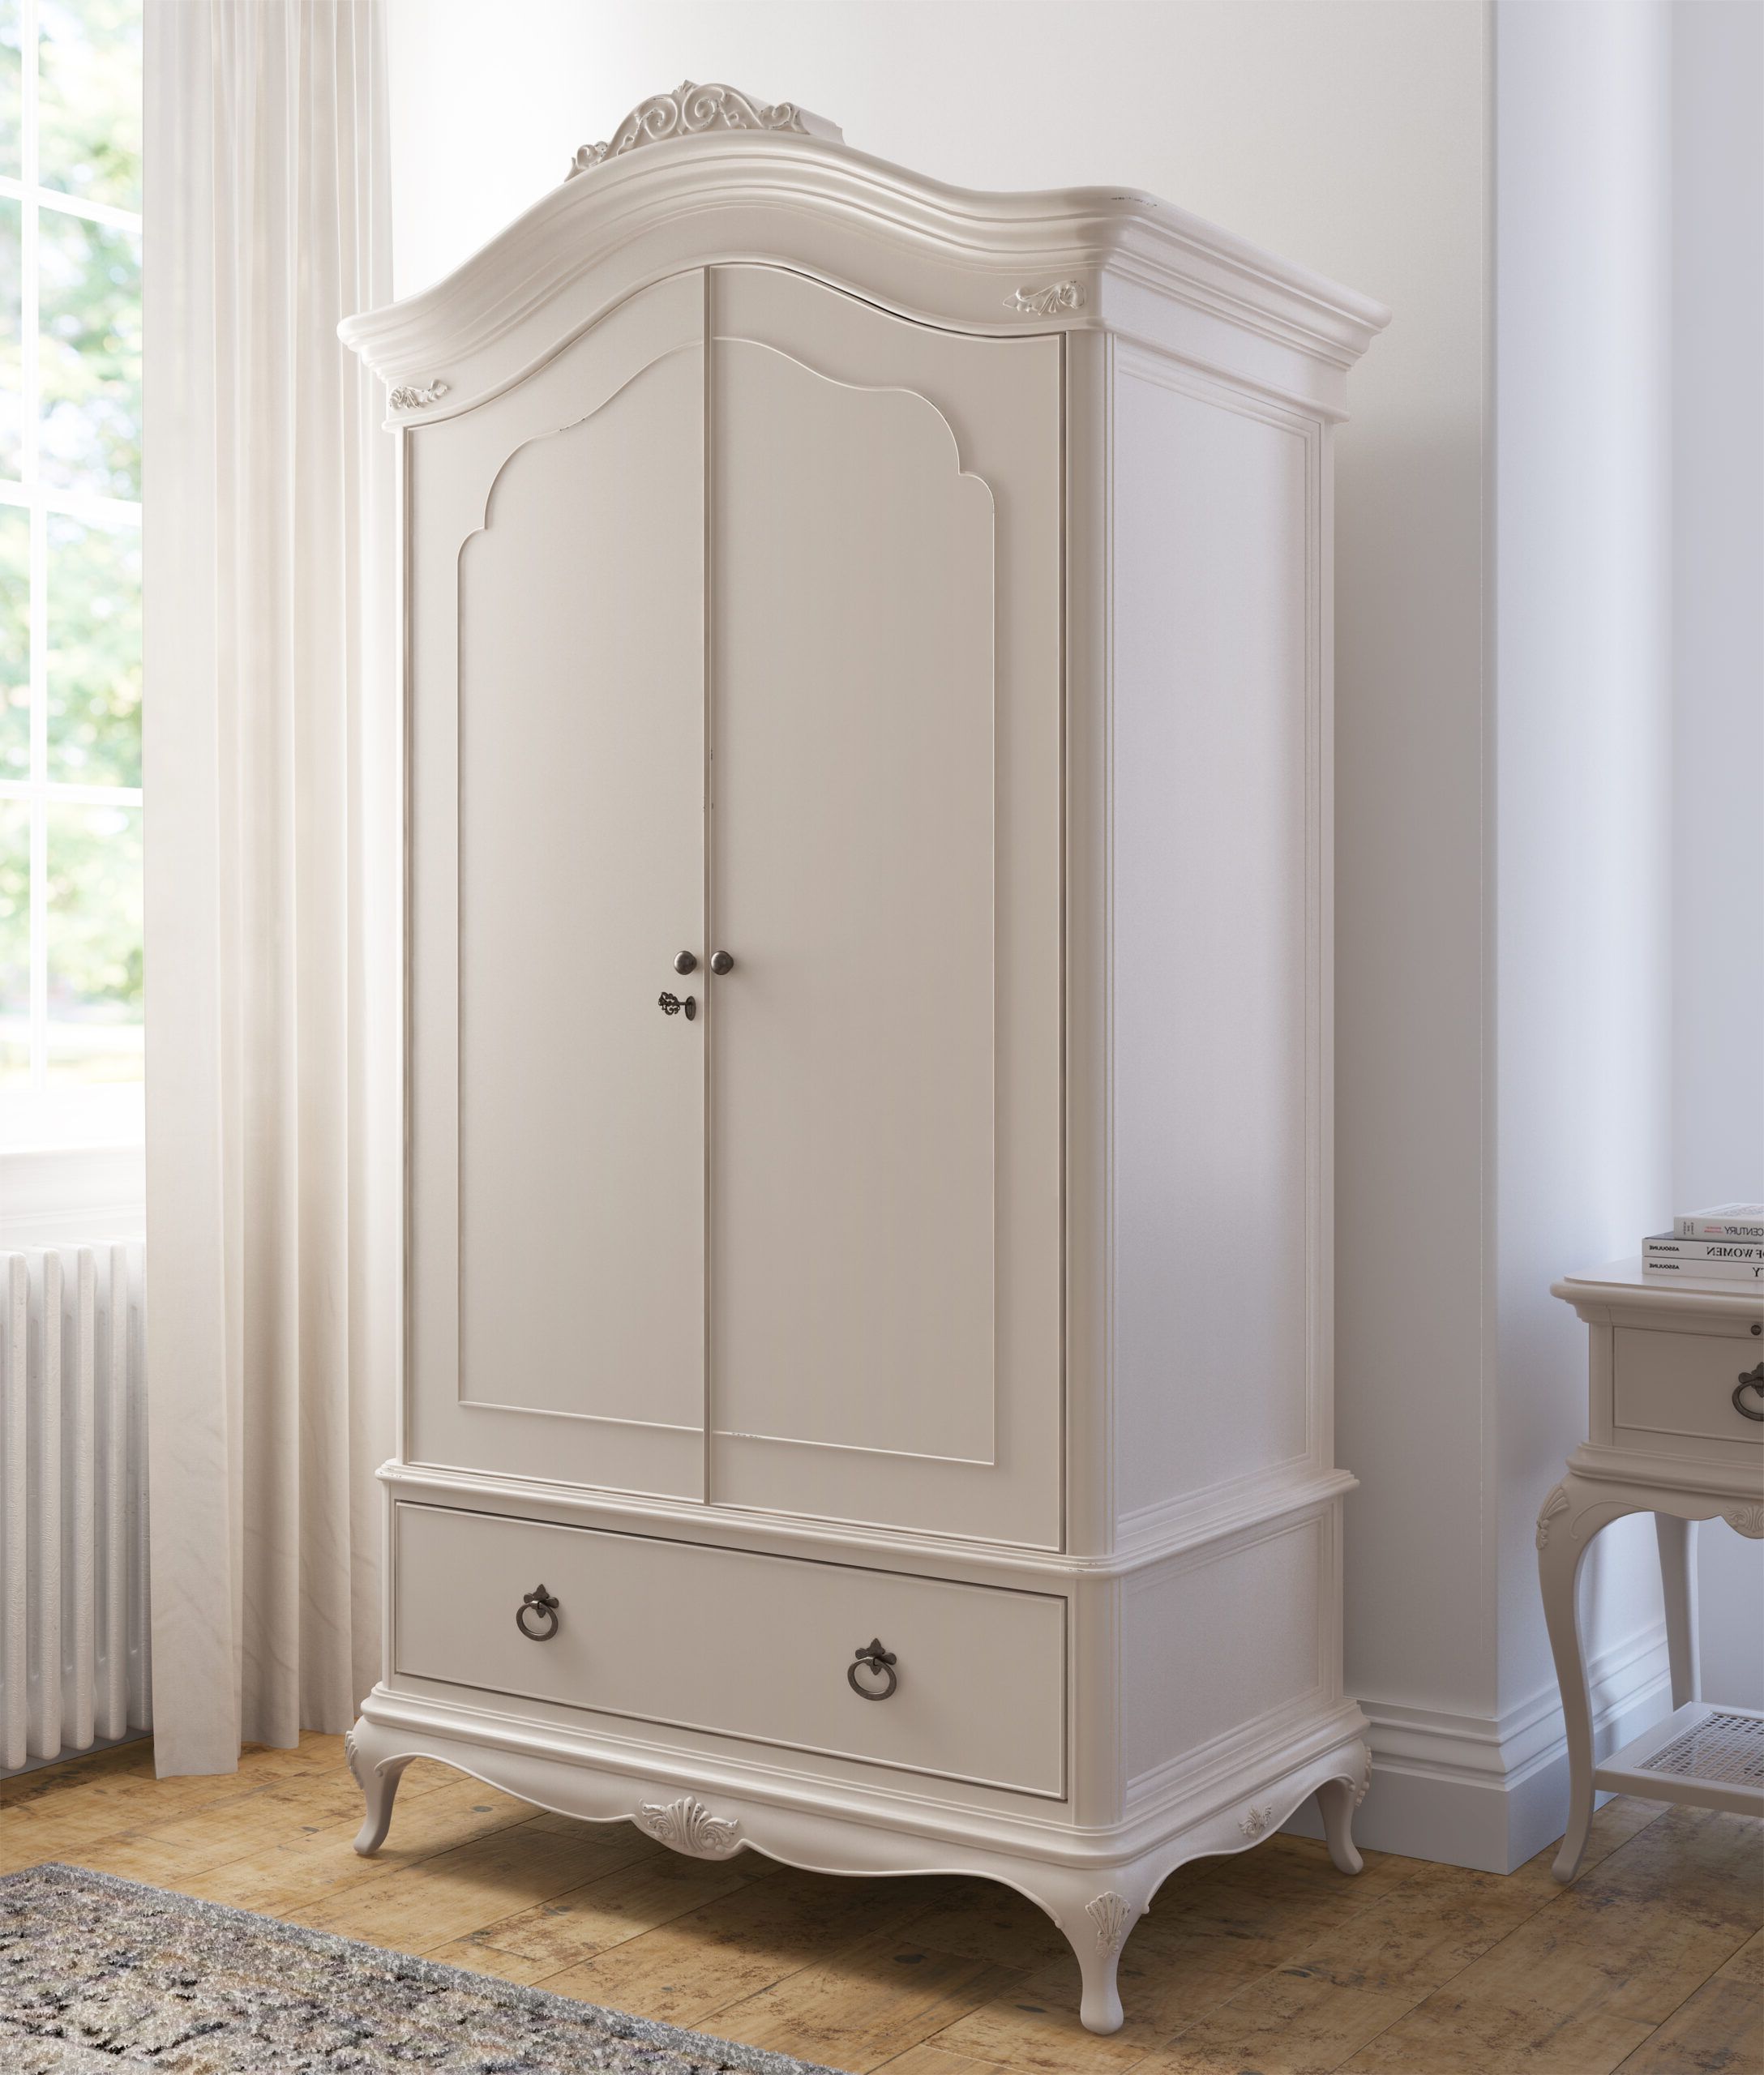 Willis & Gambier Ivory 2 Door 1 Drawer Double Wardrobe – Love The Bed Inside Shabby Chic Wardrobes For Sale (View 11 of 20)